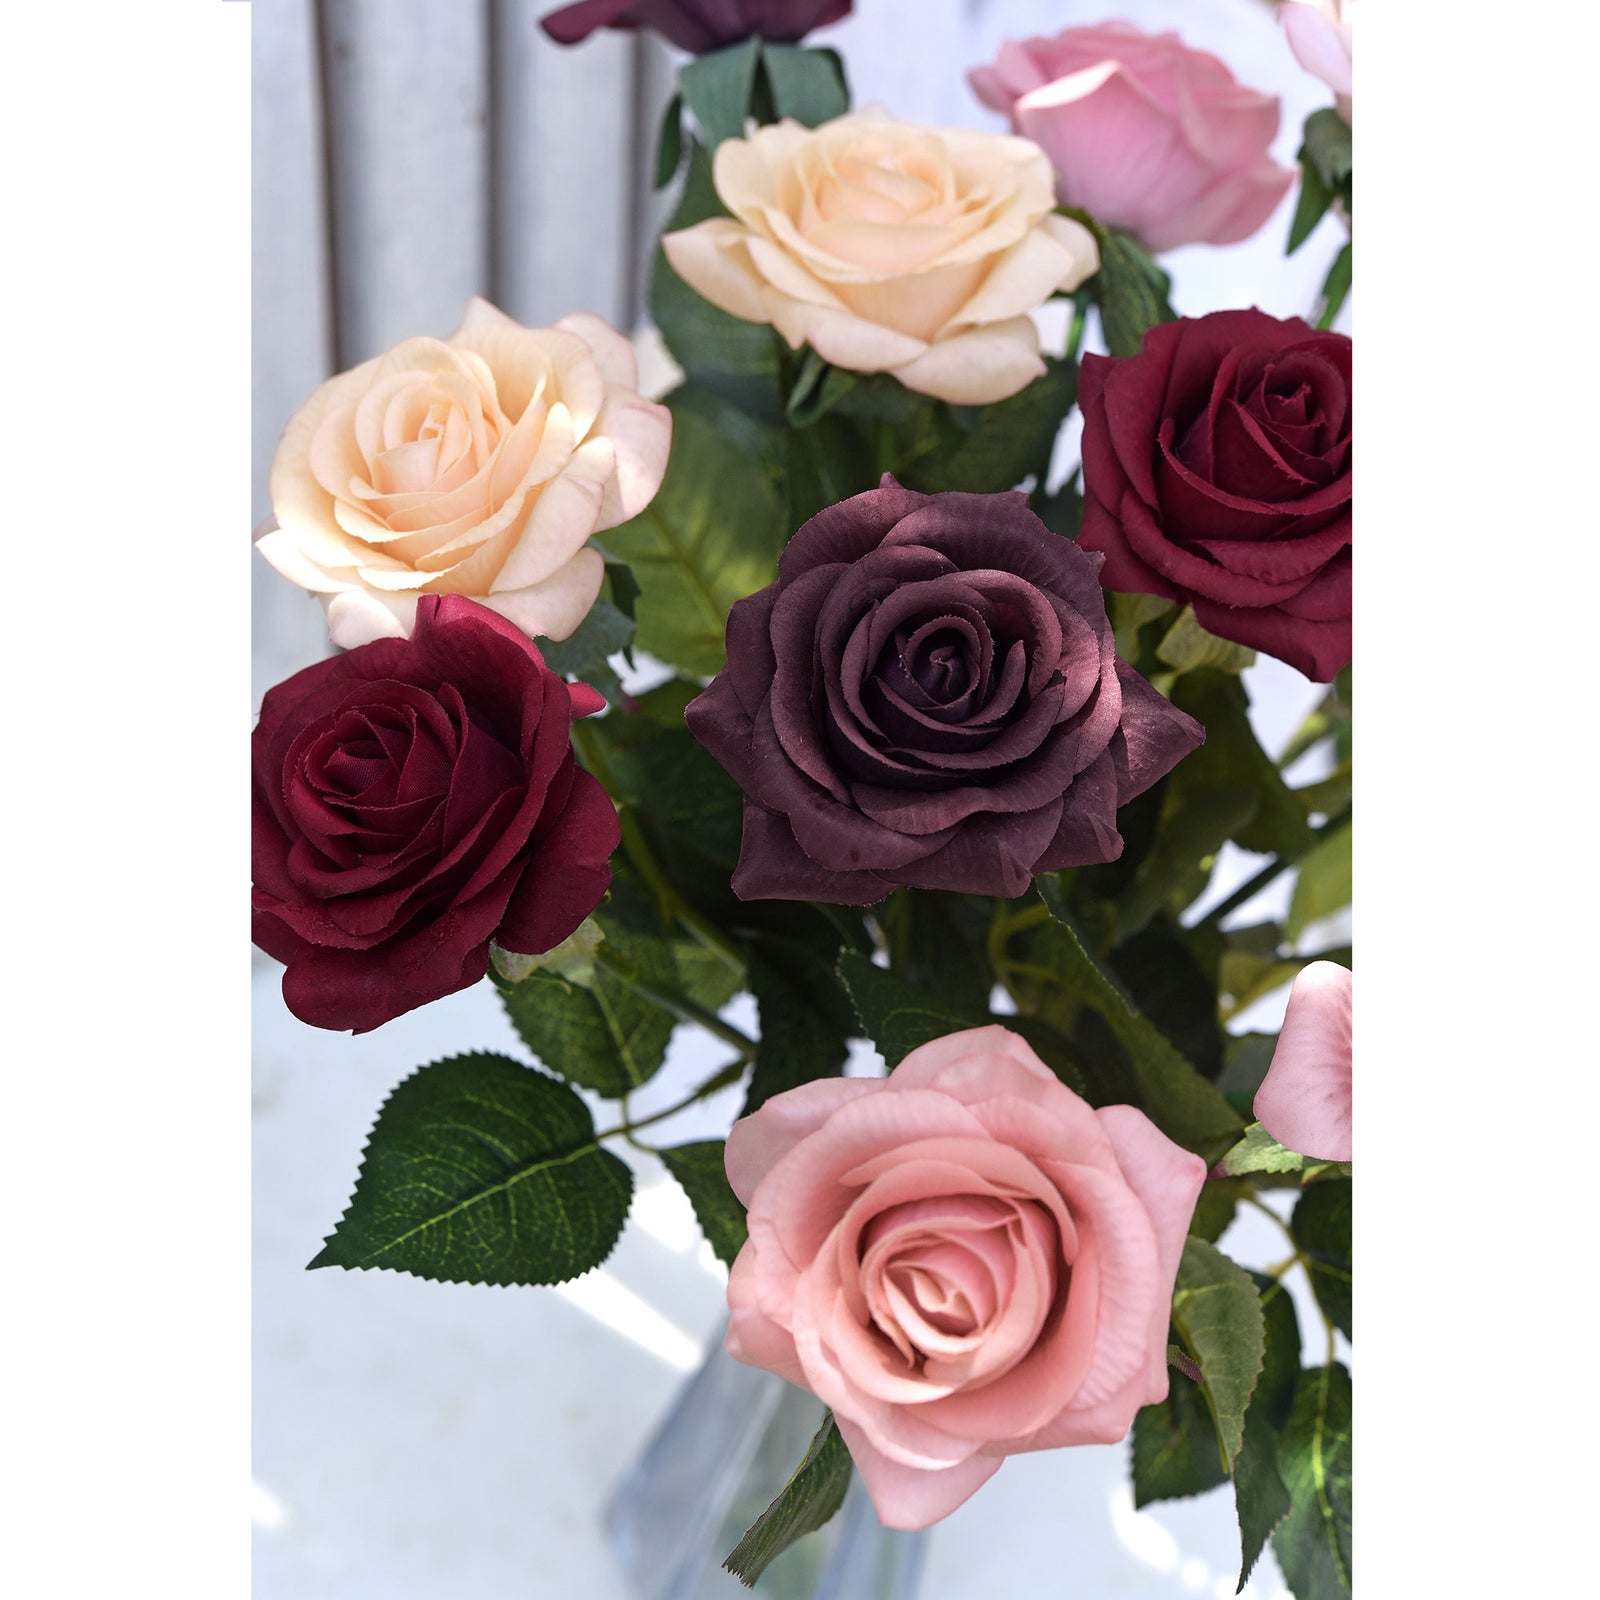 Artificial Flowers Real Touch Silk Roses 12 Stems (Rustic Pink) ‘Petals Feel and Look like Fresh Roses' -Fiveseasonstuff